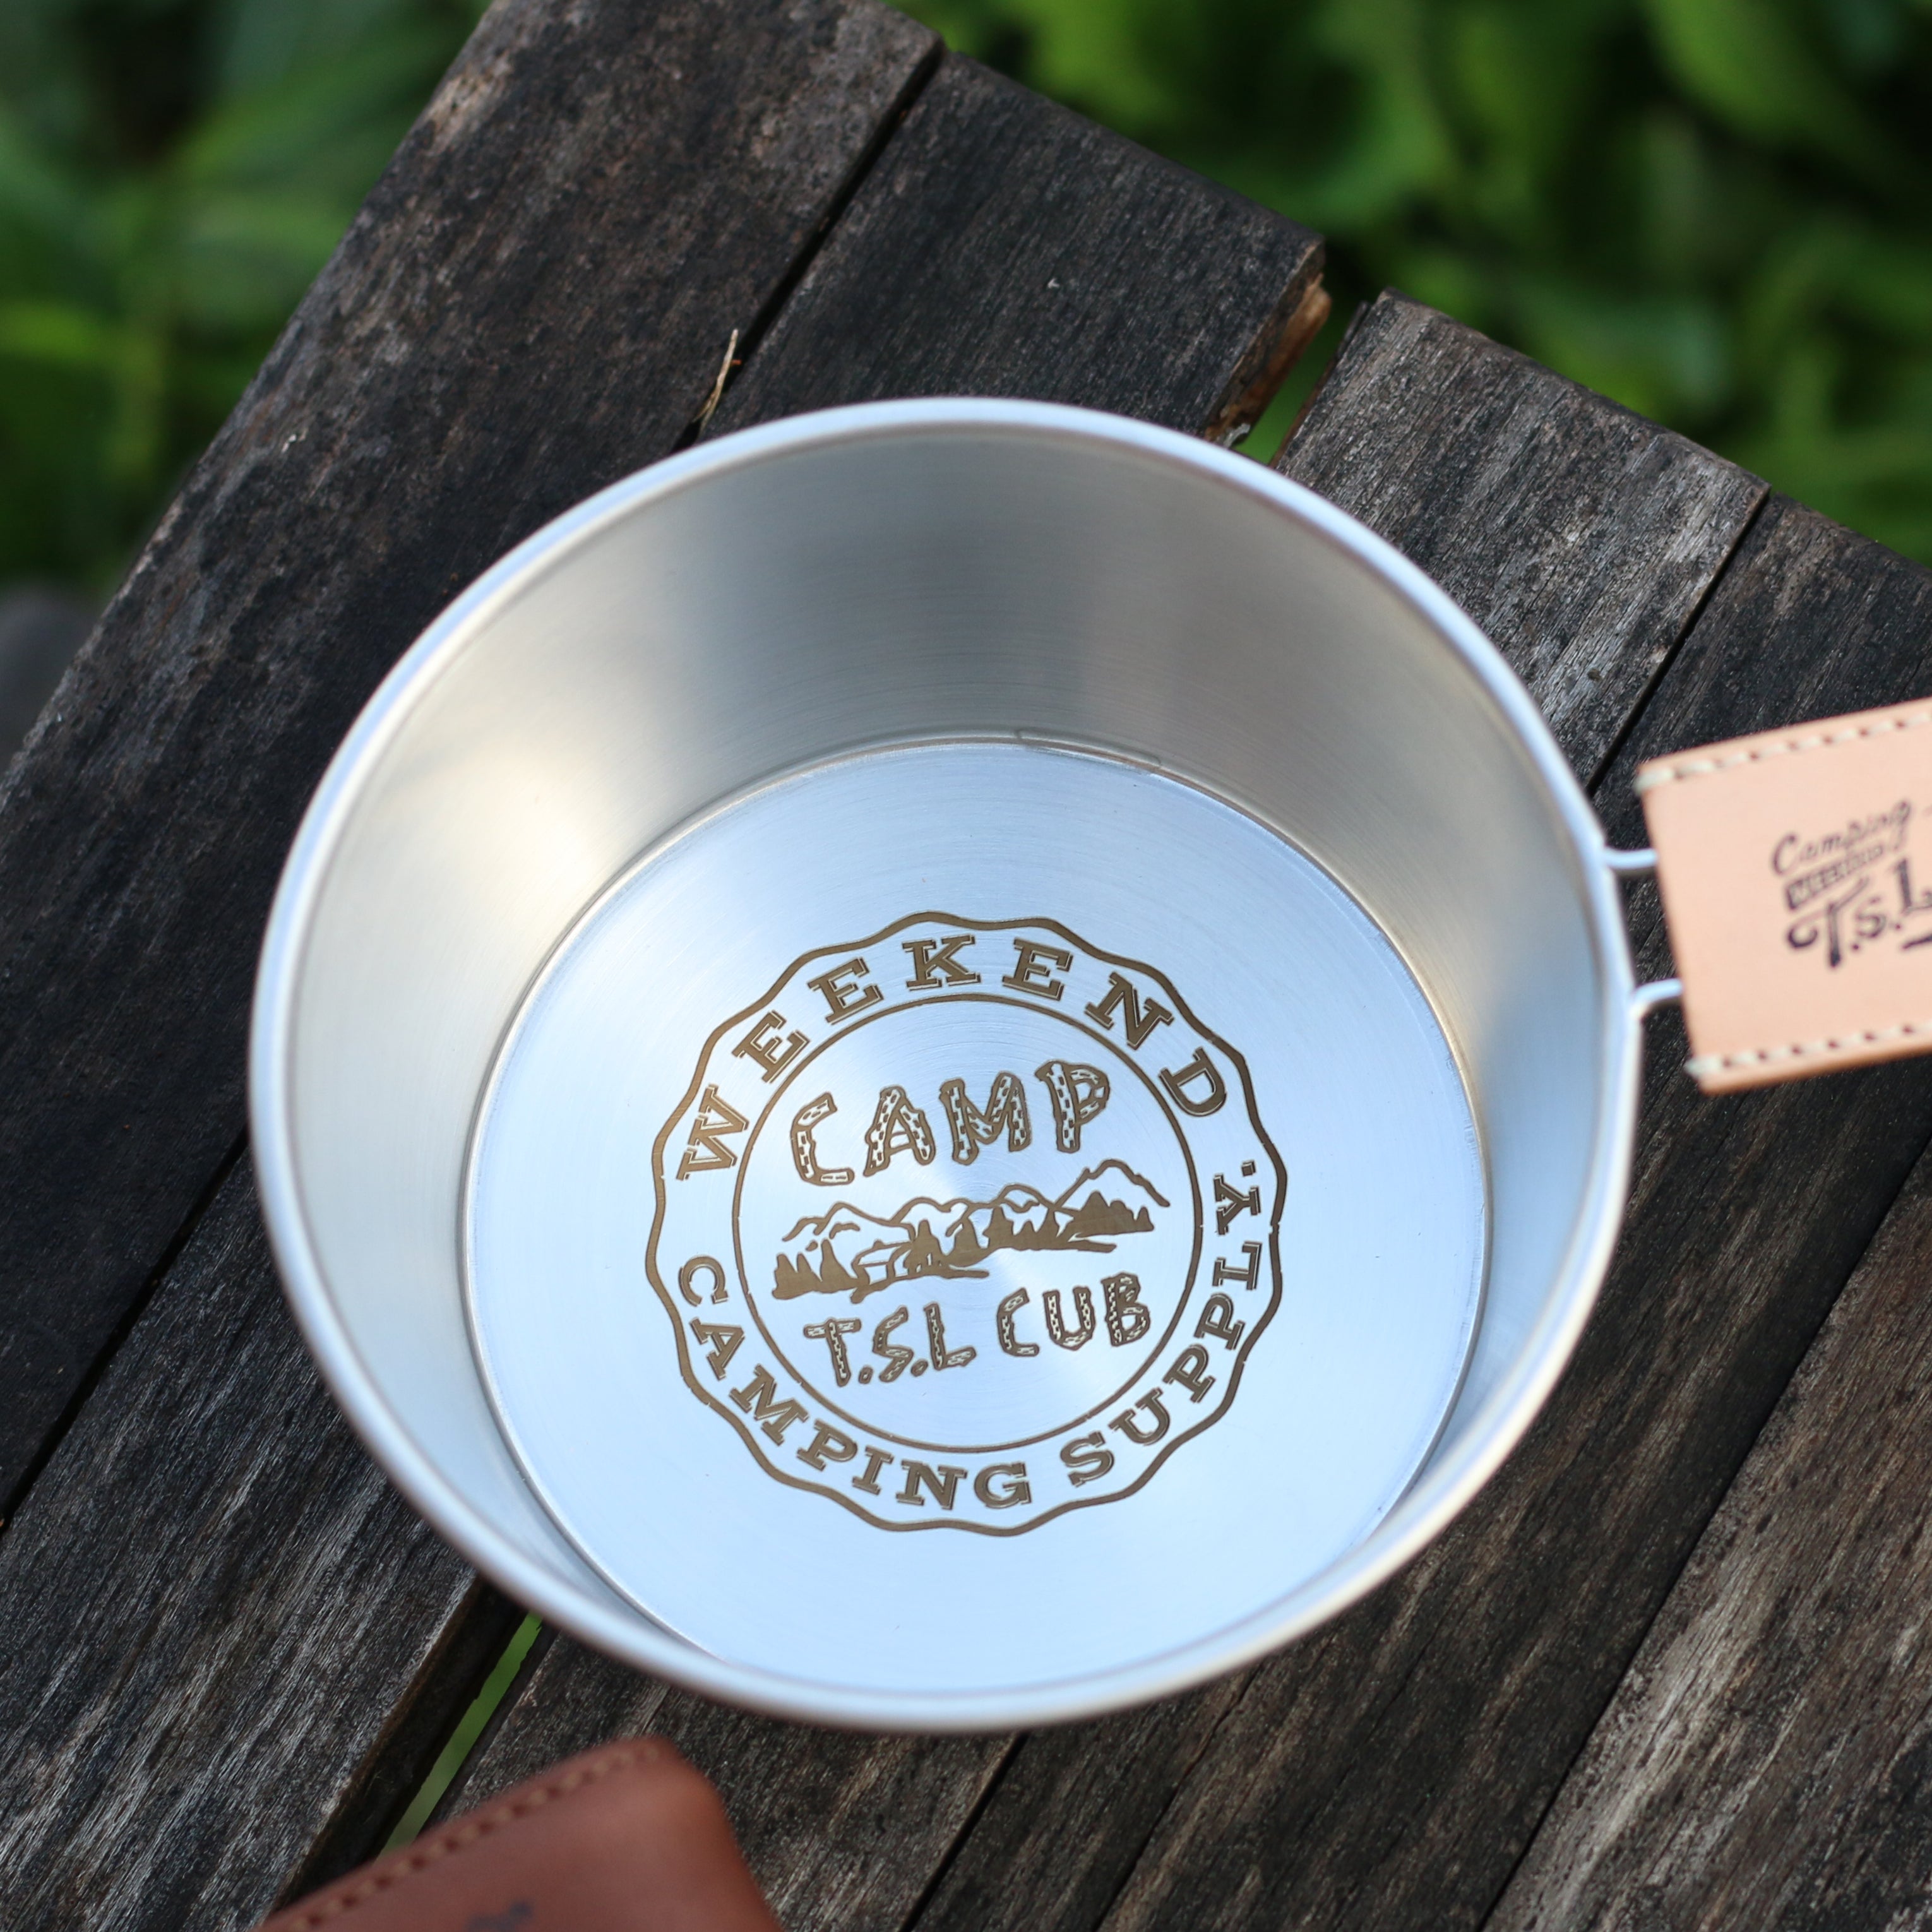 ROCKY CUP | THE SUPERIOR LABOR / T.S.L CUB | official website